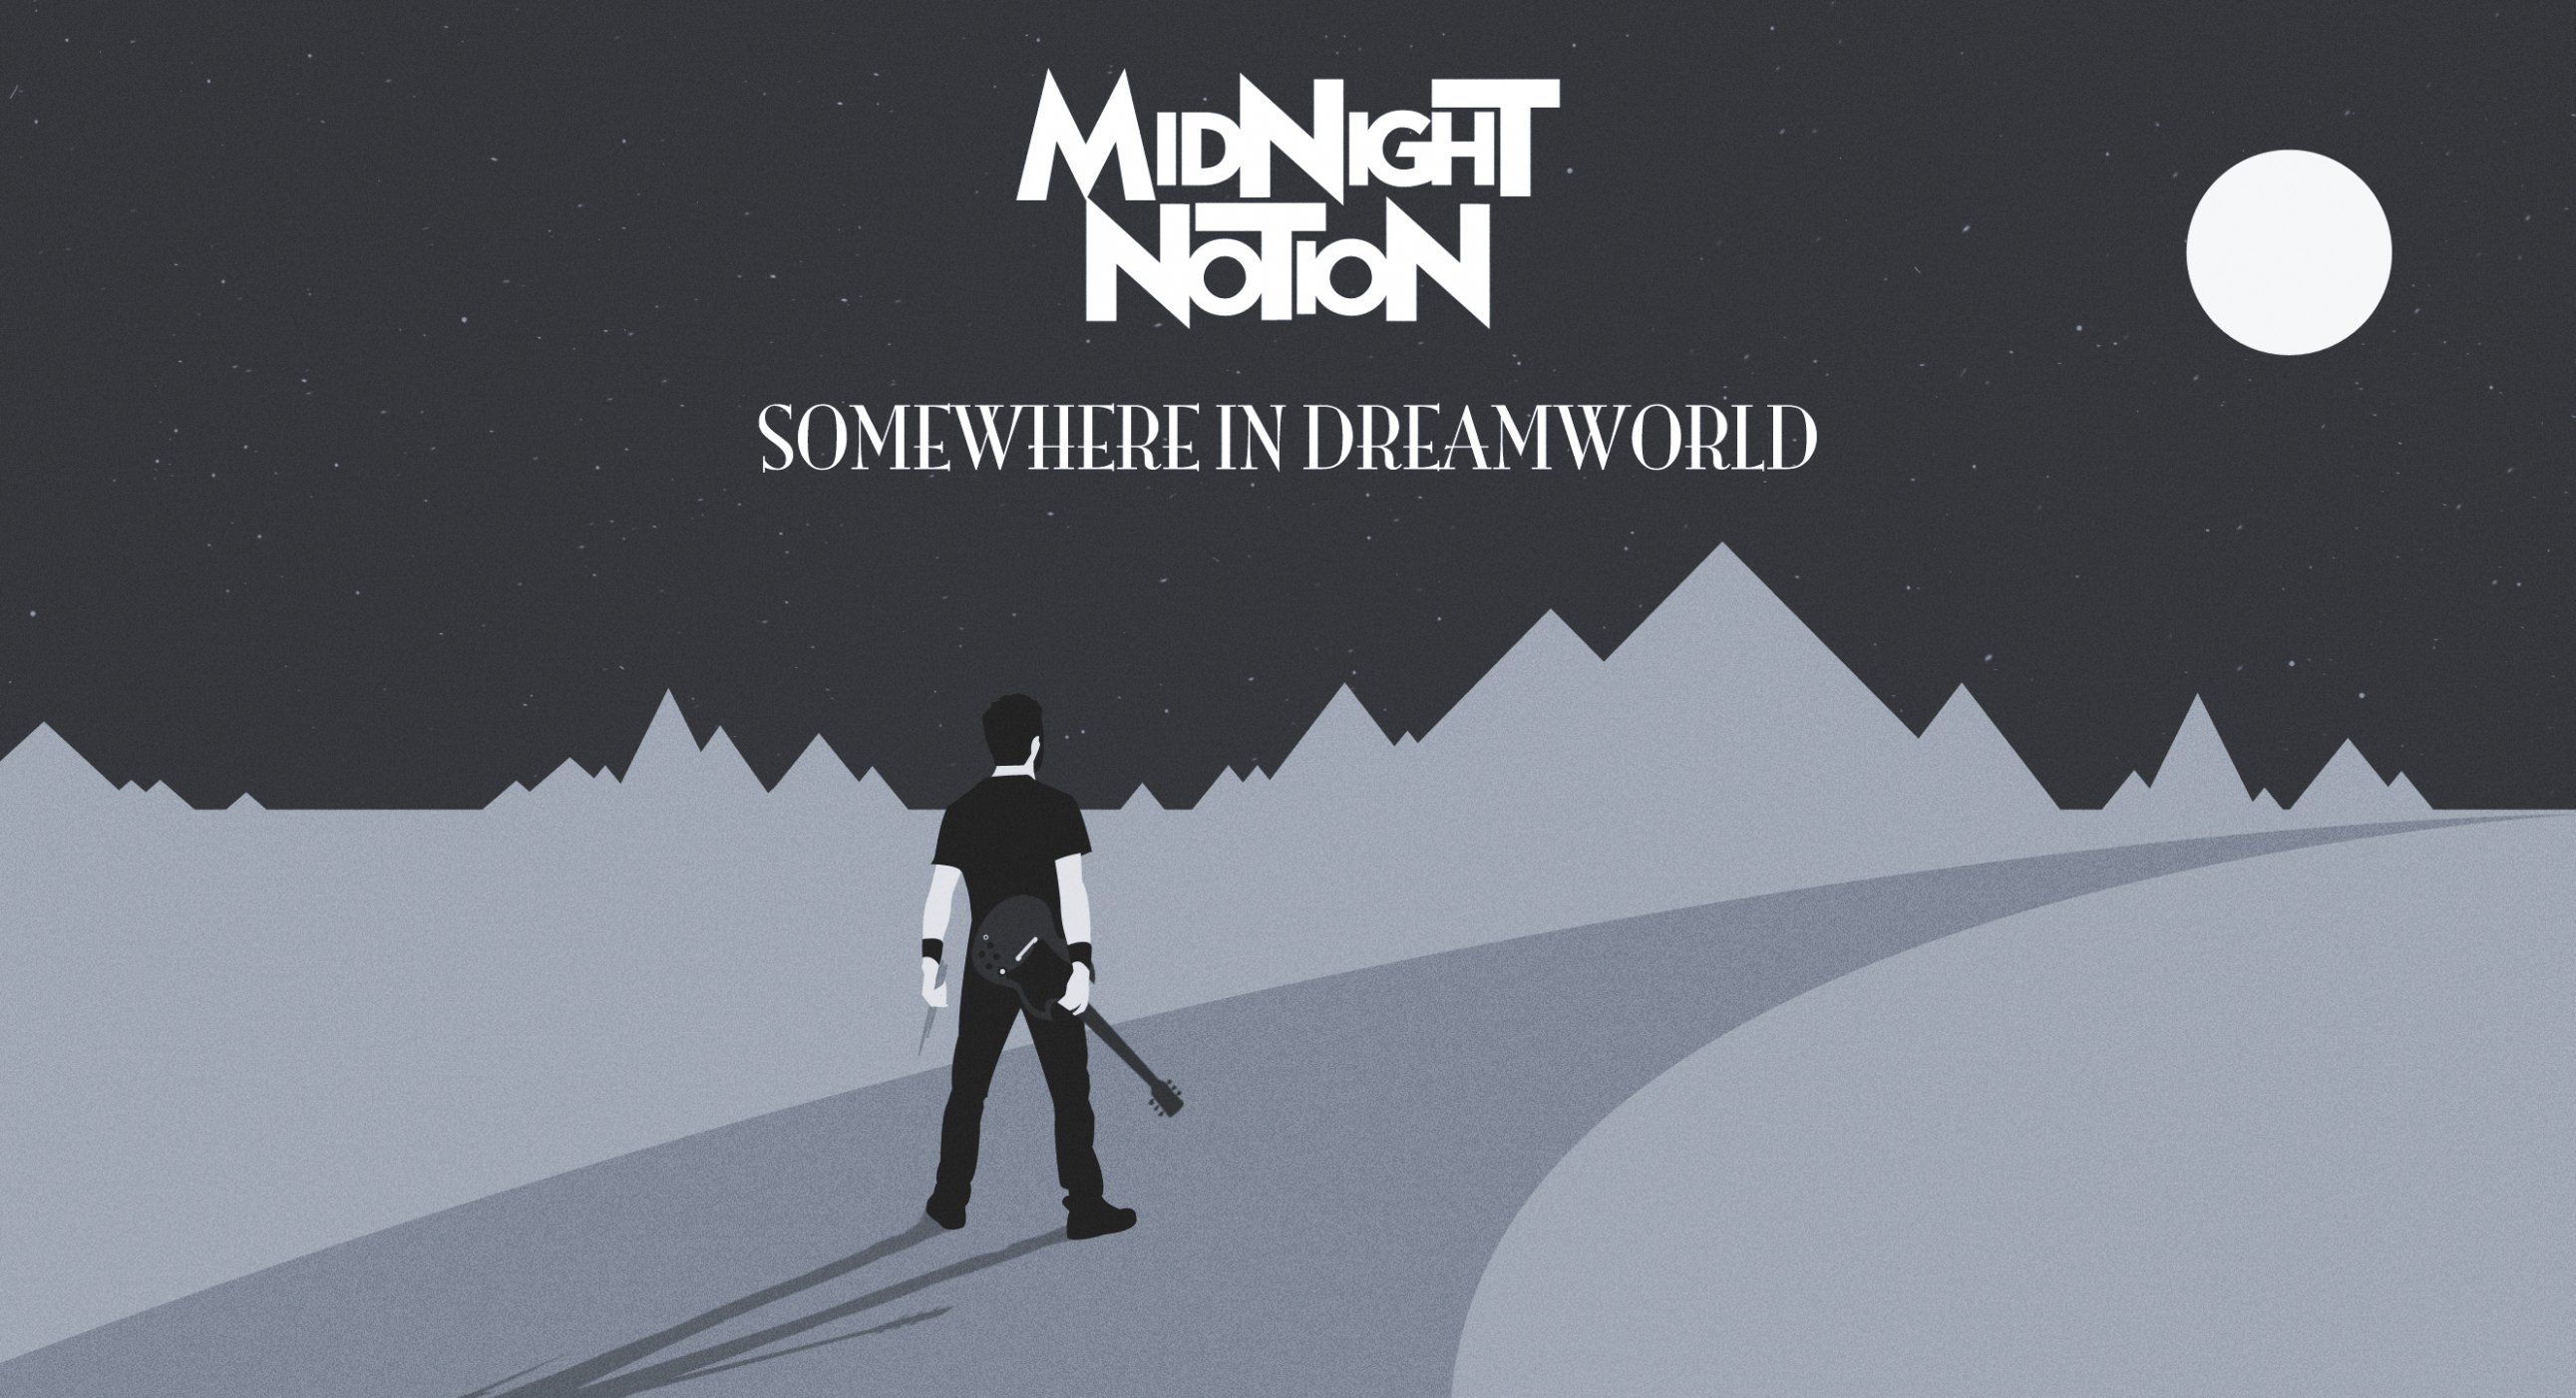 Somewhere in Dreamworld…THE PODCAST!